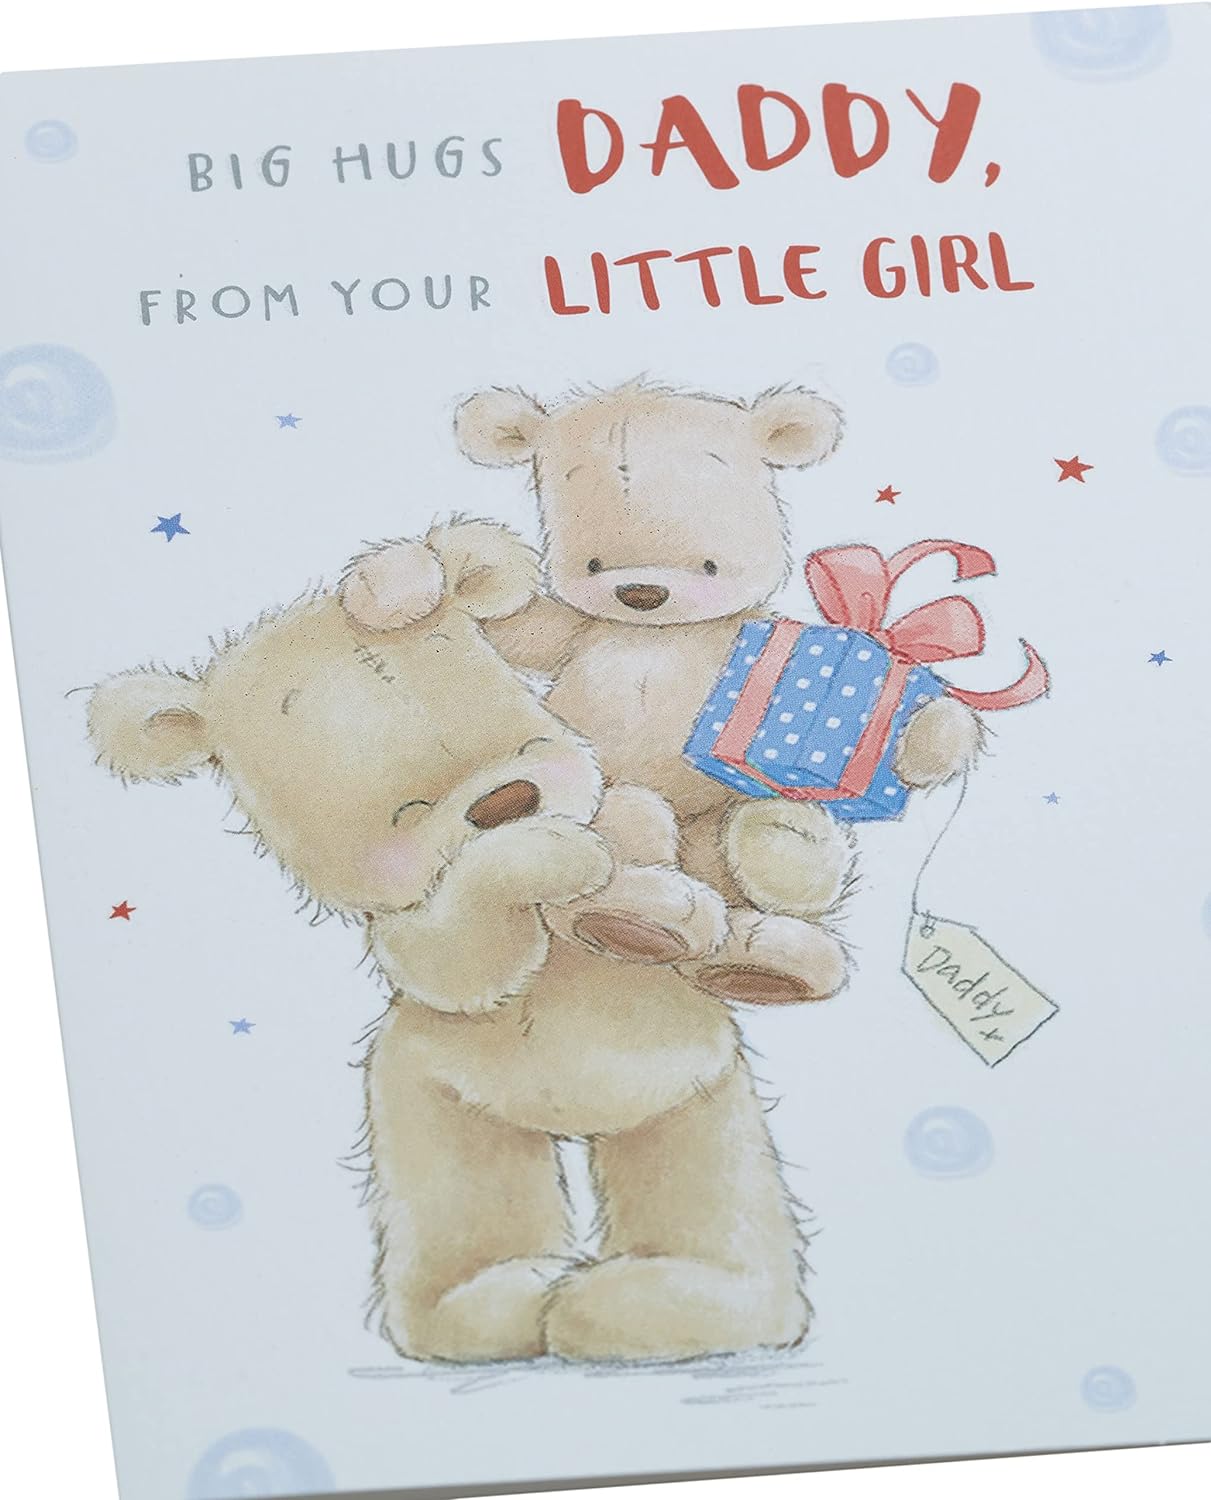 Teddy Bear Design From Your Little Girl Father's Day Card